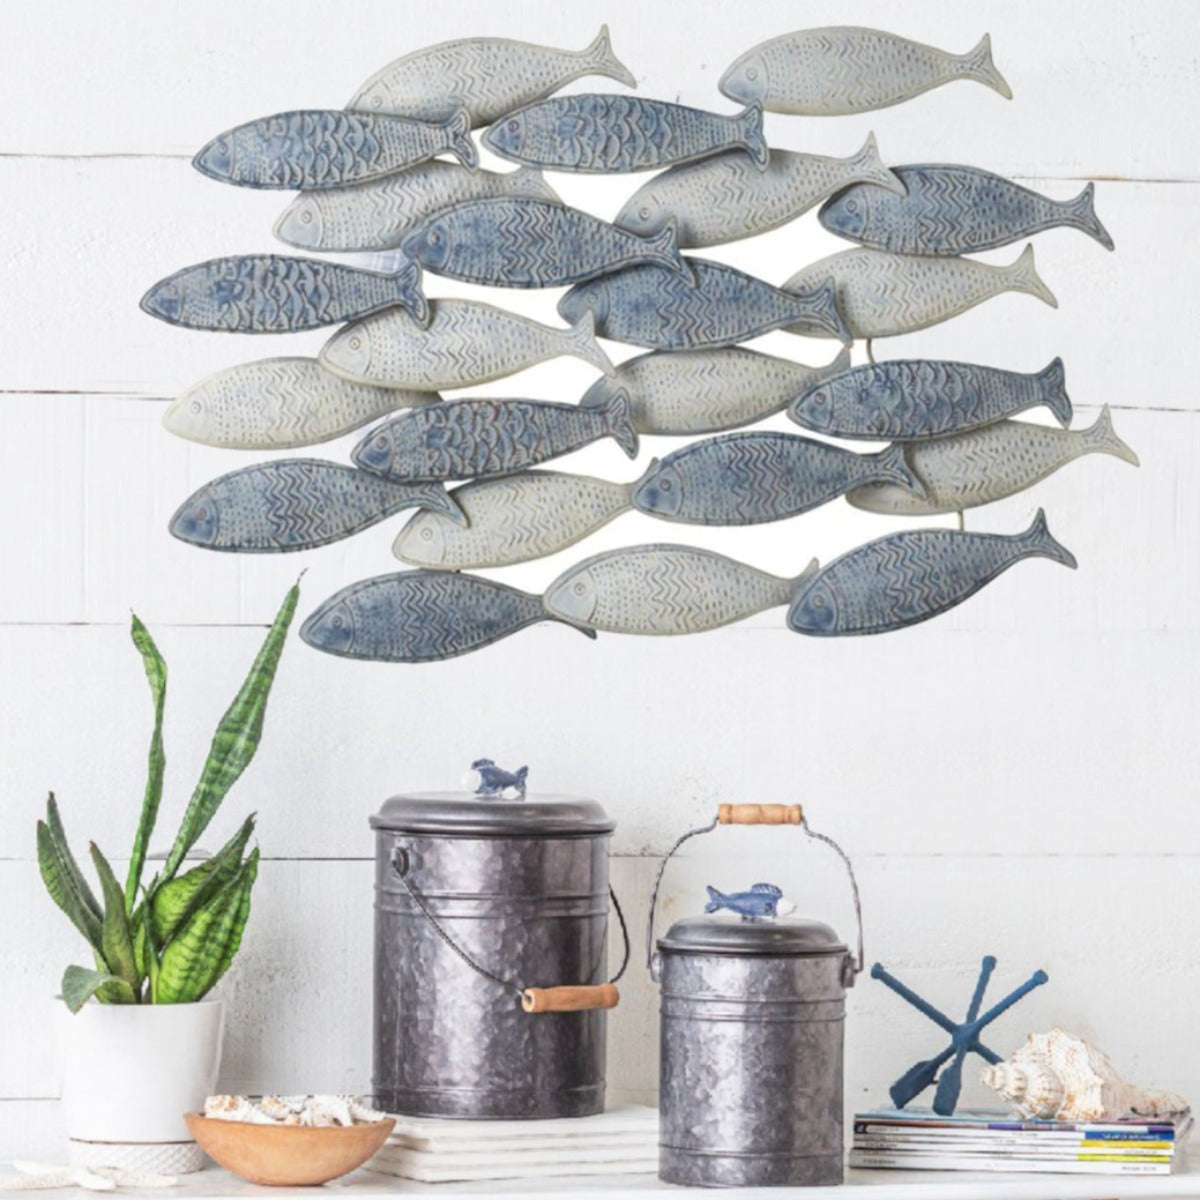 Midwest-CBK Weathered Layered Embossed Fish Wall Decor